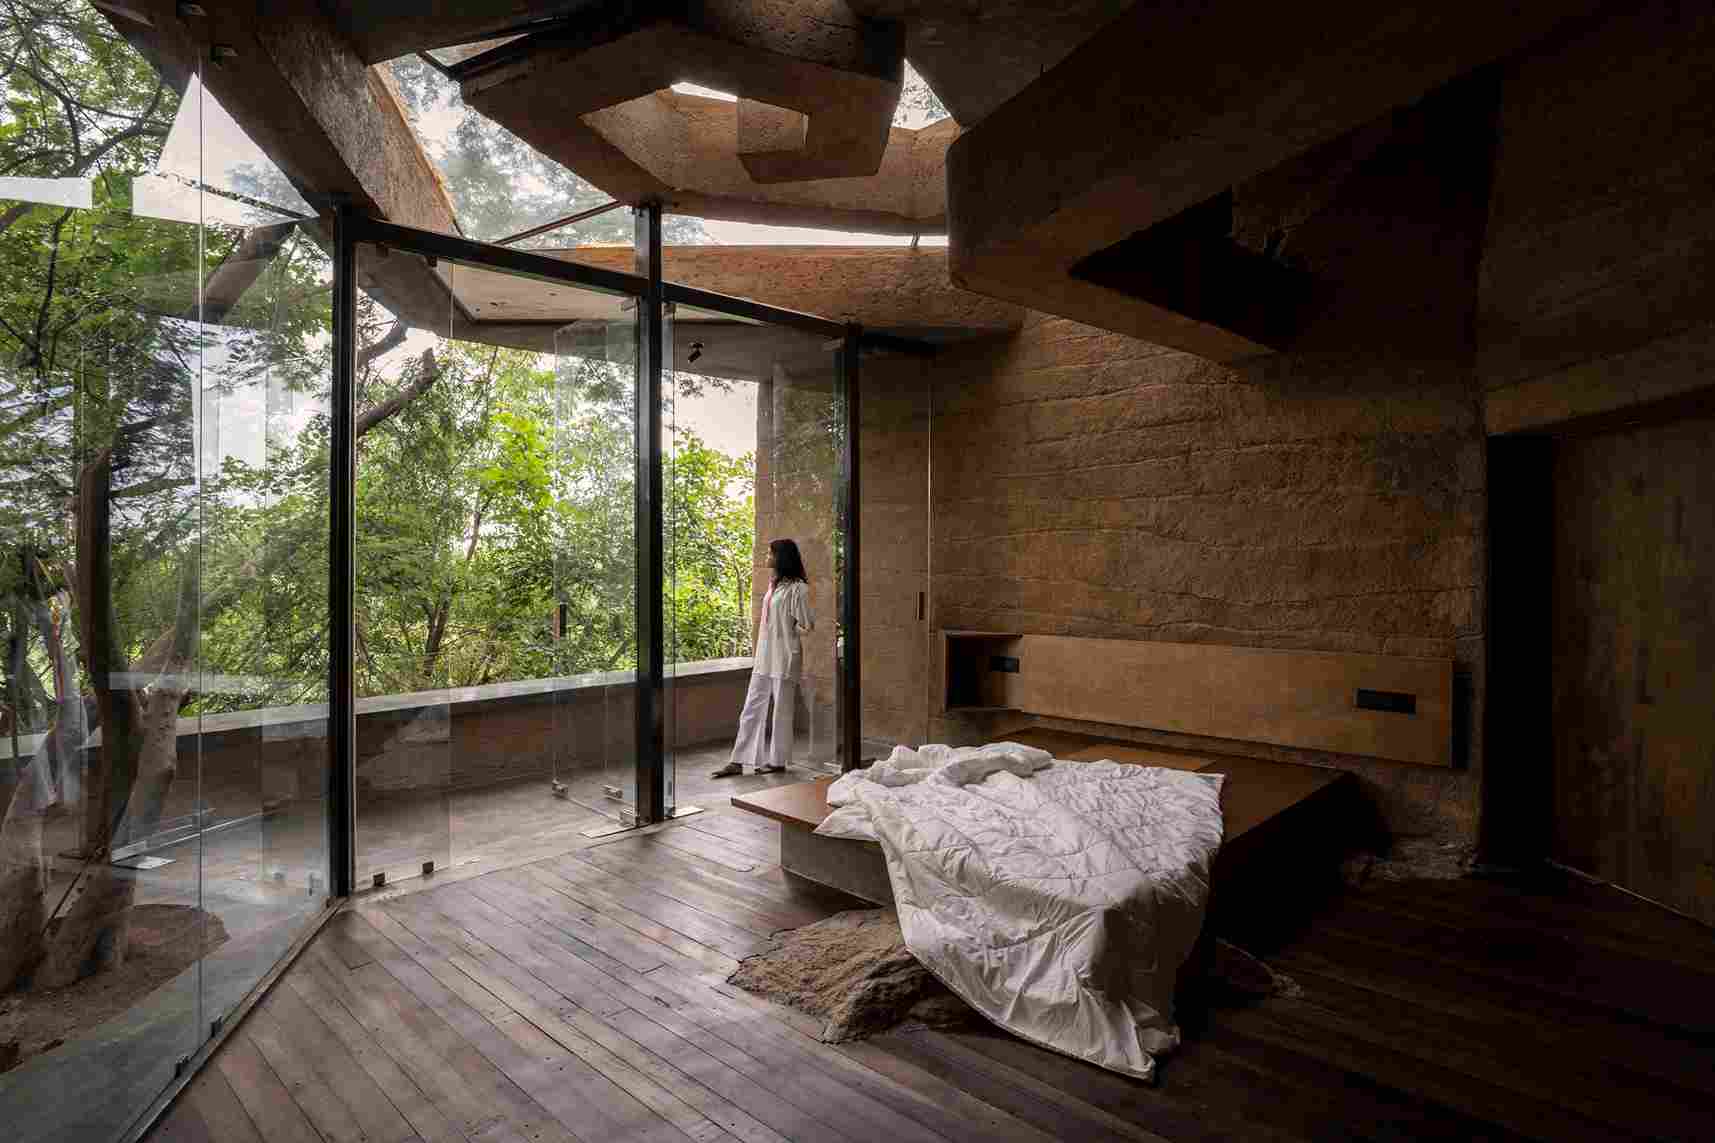 The bedrooms at Chuzhi have flooring made with reclaimed wood and mud walls